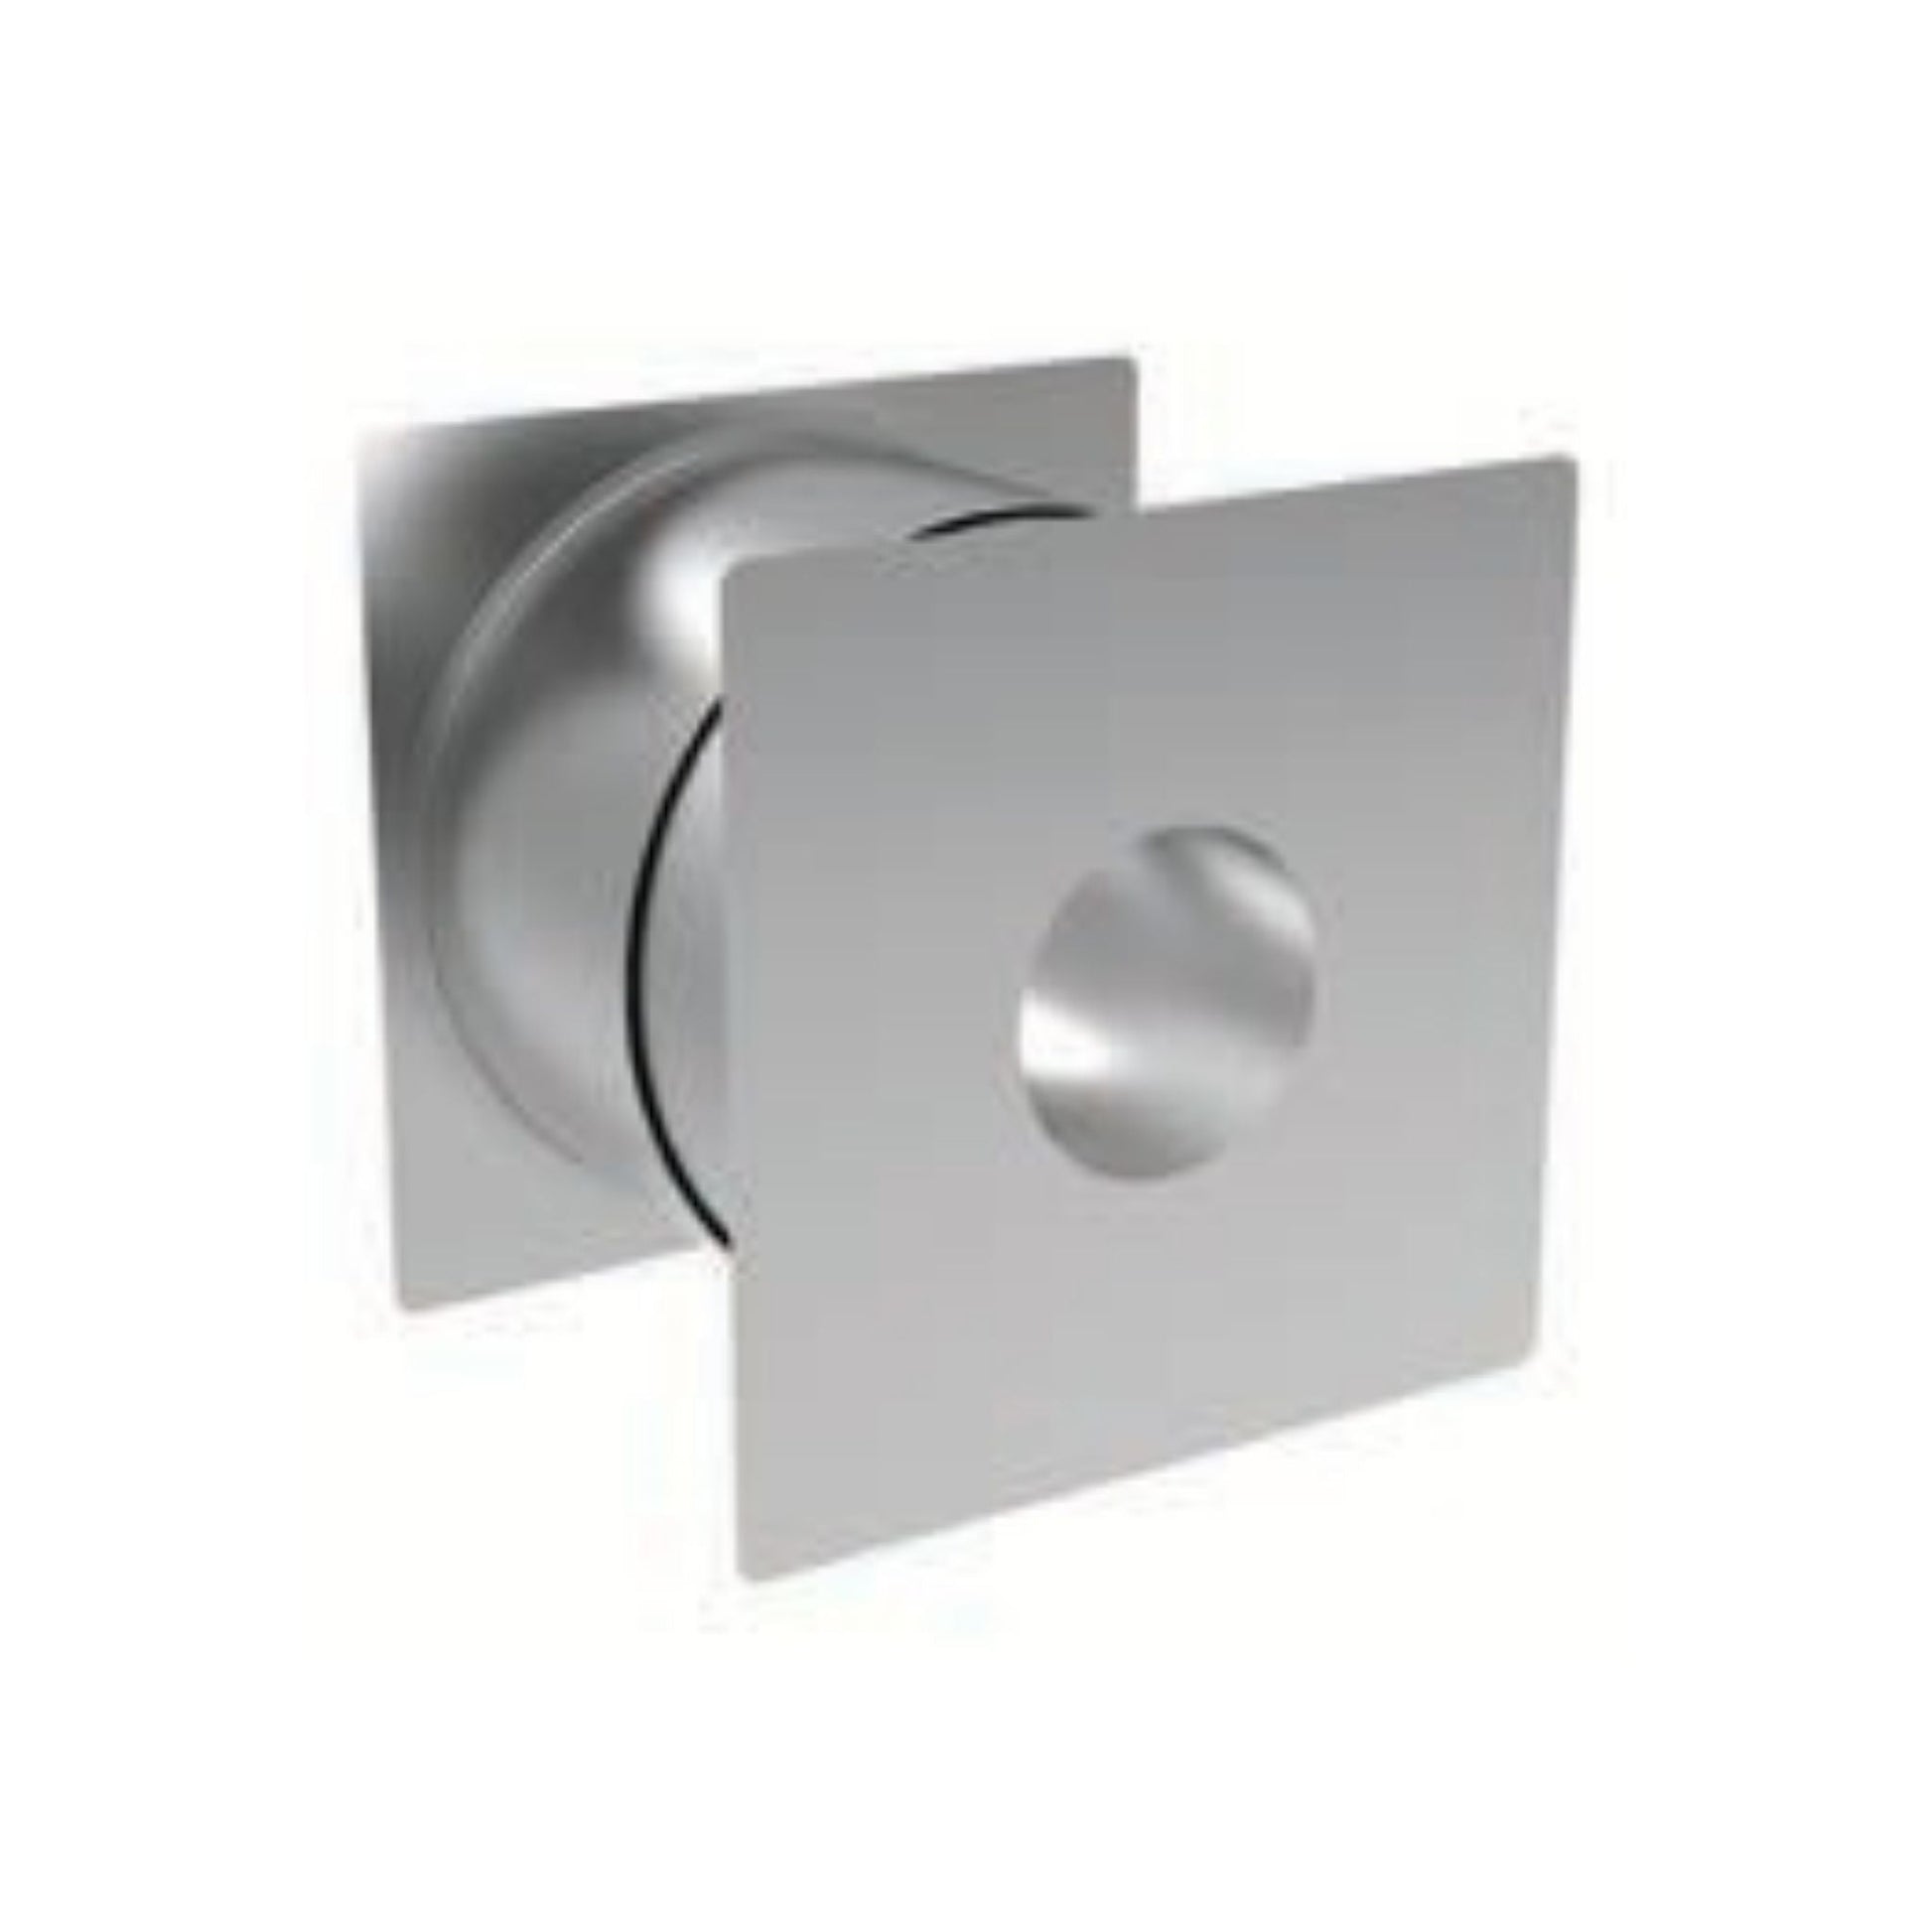 DuraVent FasNSeal 14" 29-4C Stainless Steel Insulated Wall Pass Through